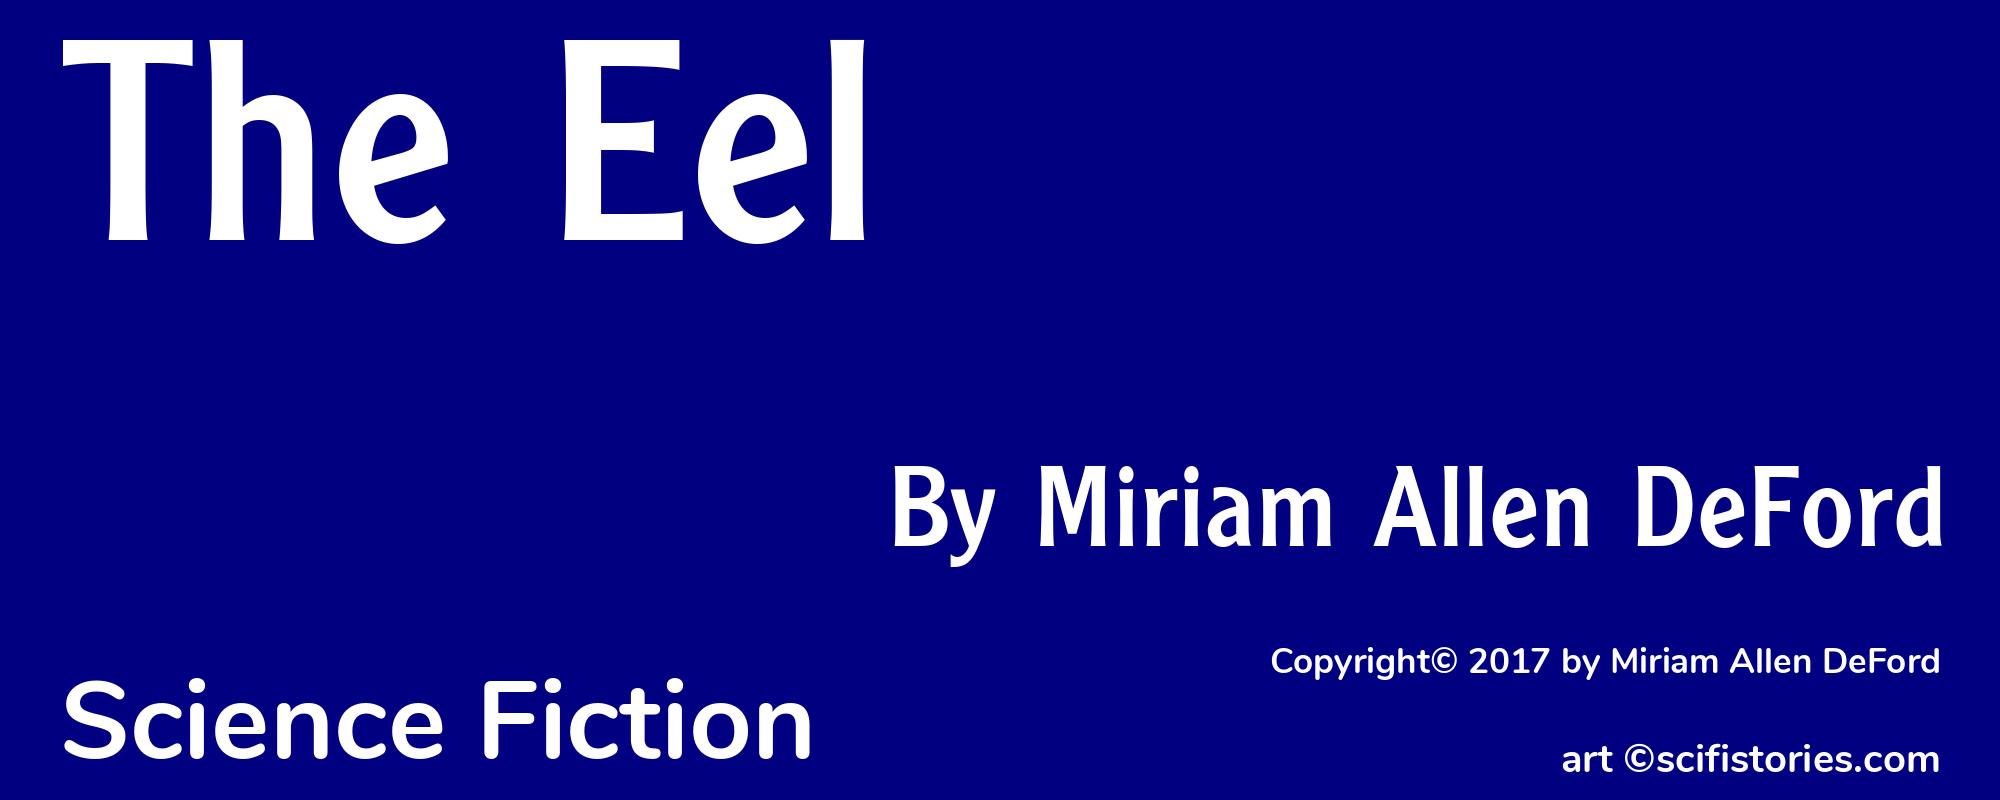 The Eel - Cover